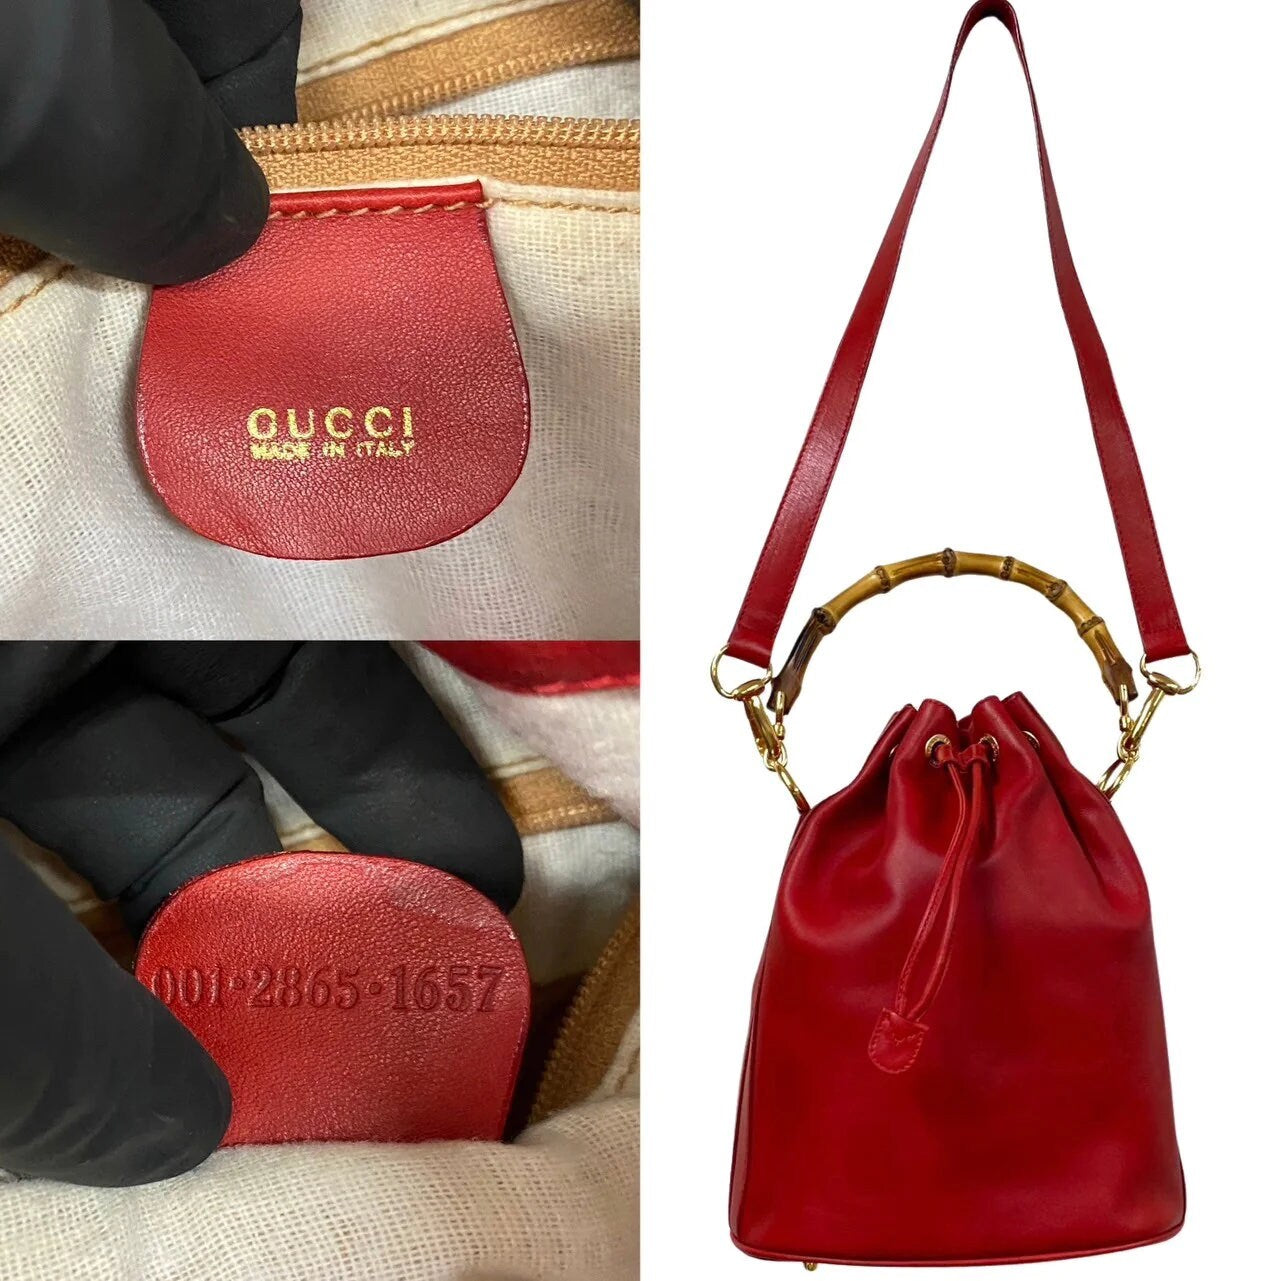 GUCCI VINTAGE 100% Genuine Bamboo Bucket Shoulder Two-way Bag, Red, late 1990's